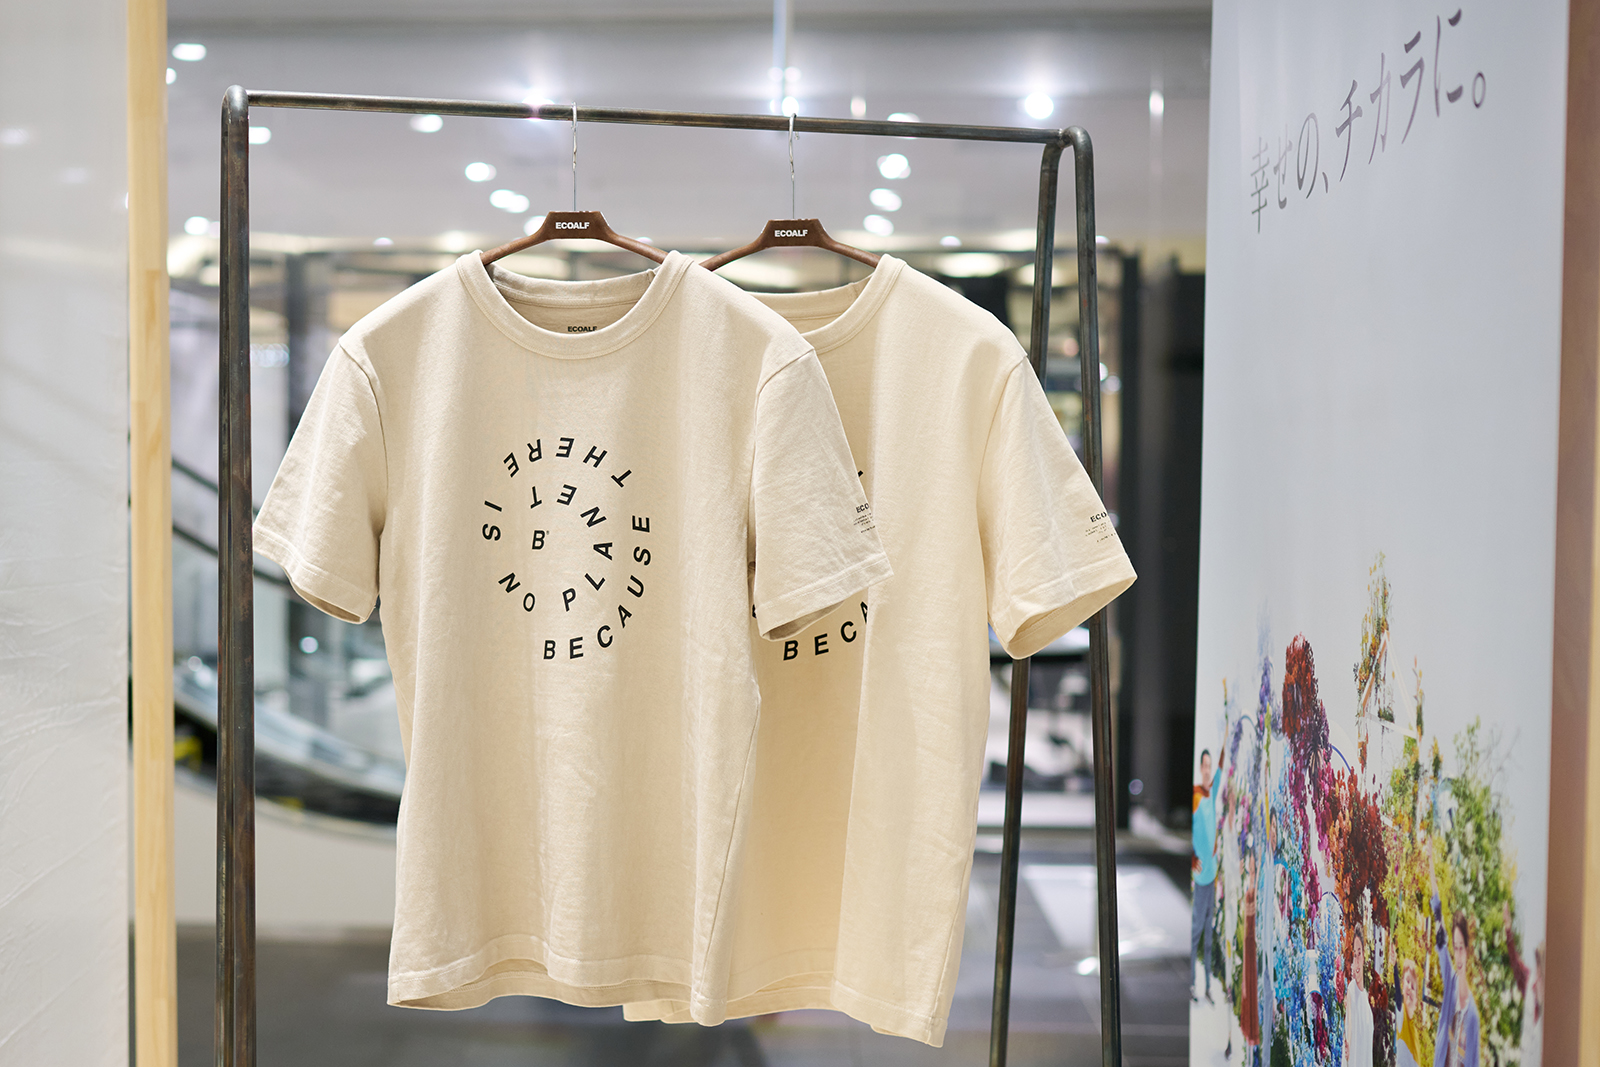 Photo: The finished “BOTANICAL BECAUSE 100 T-SHIRT with Panasonic.” Petals of various colors give the shirts a rustic look and handmade feel.